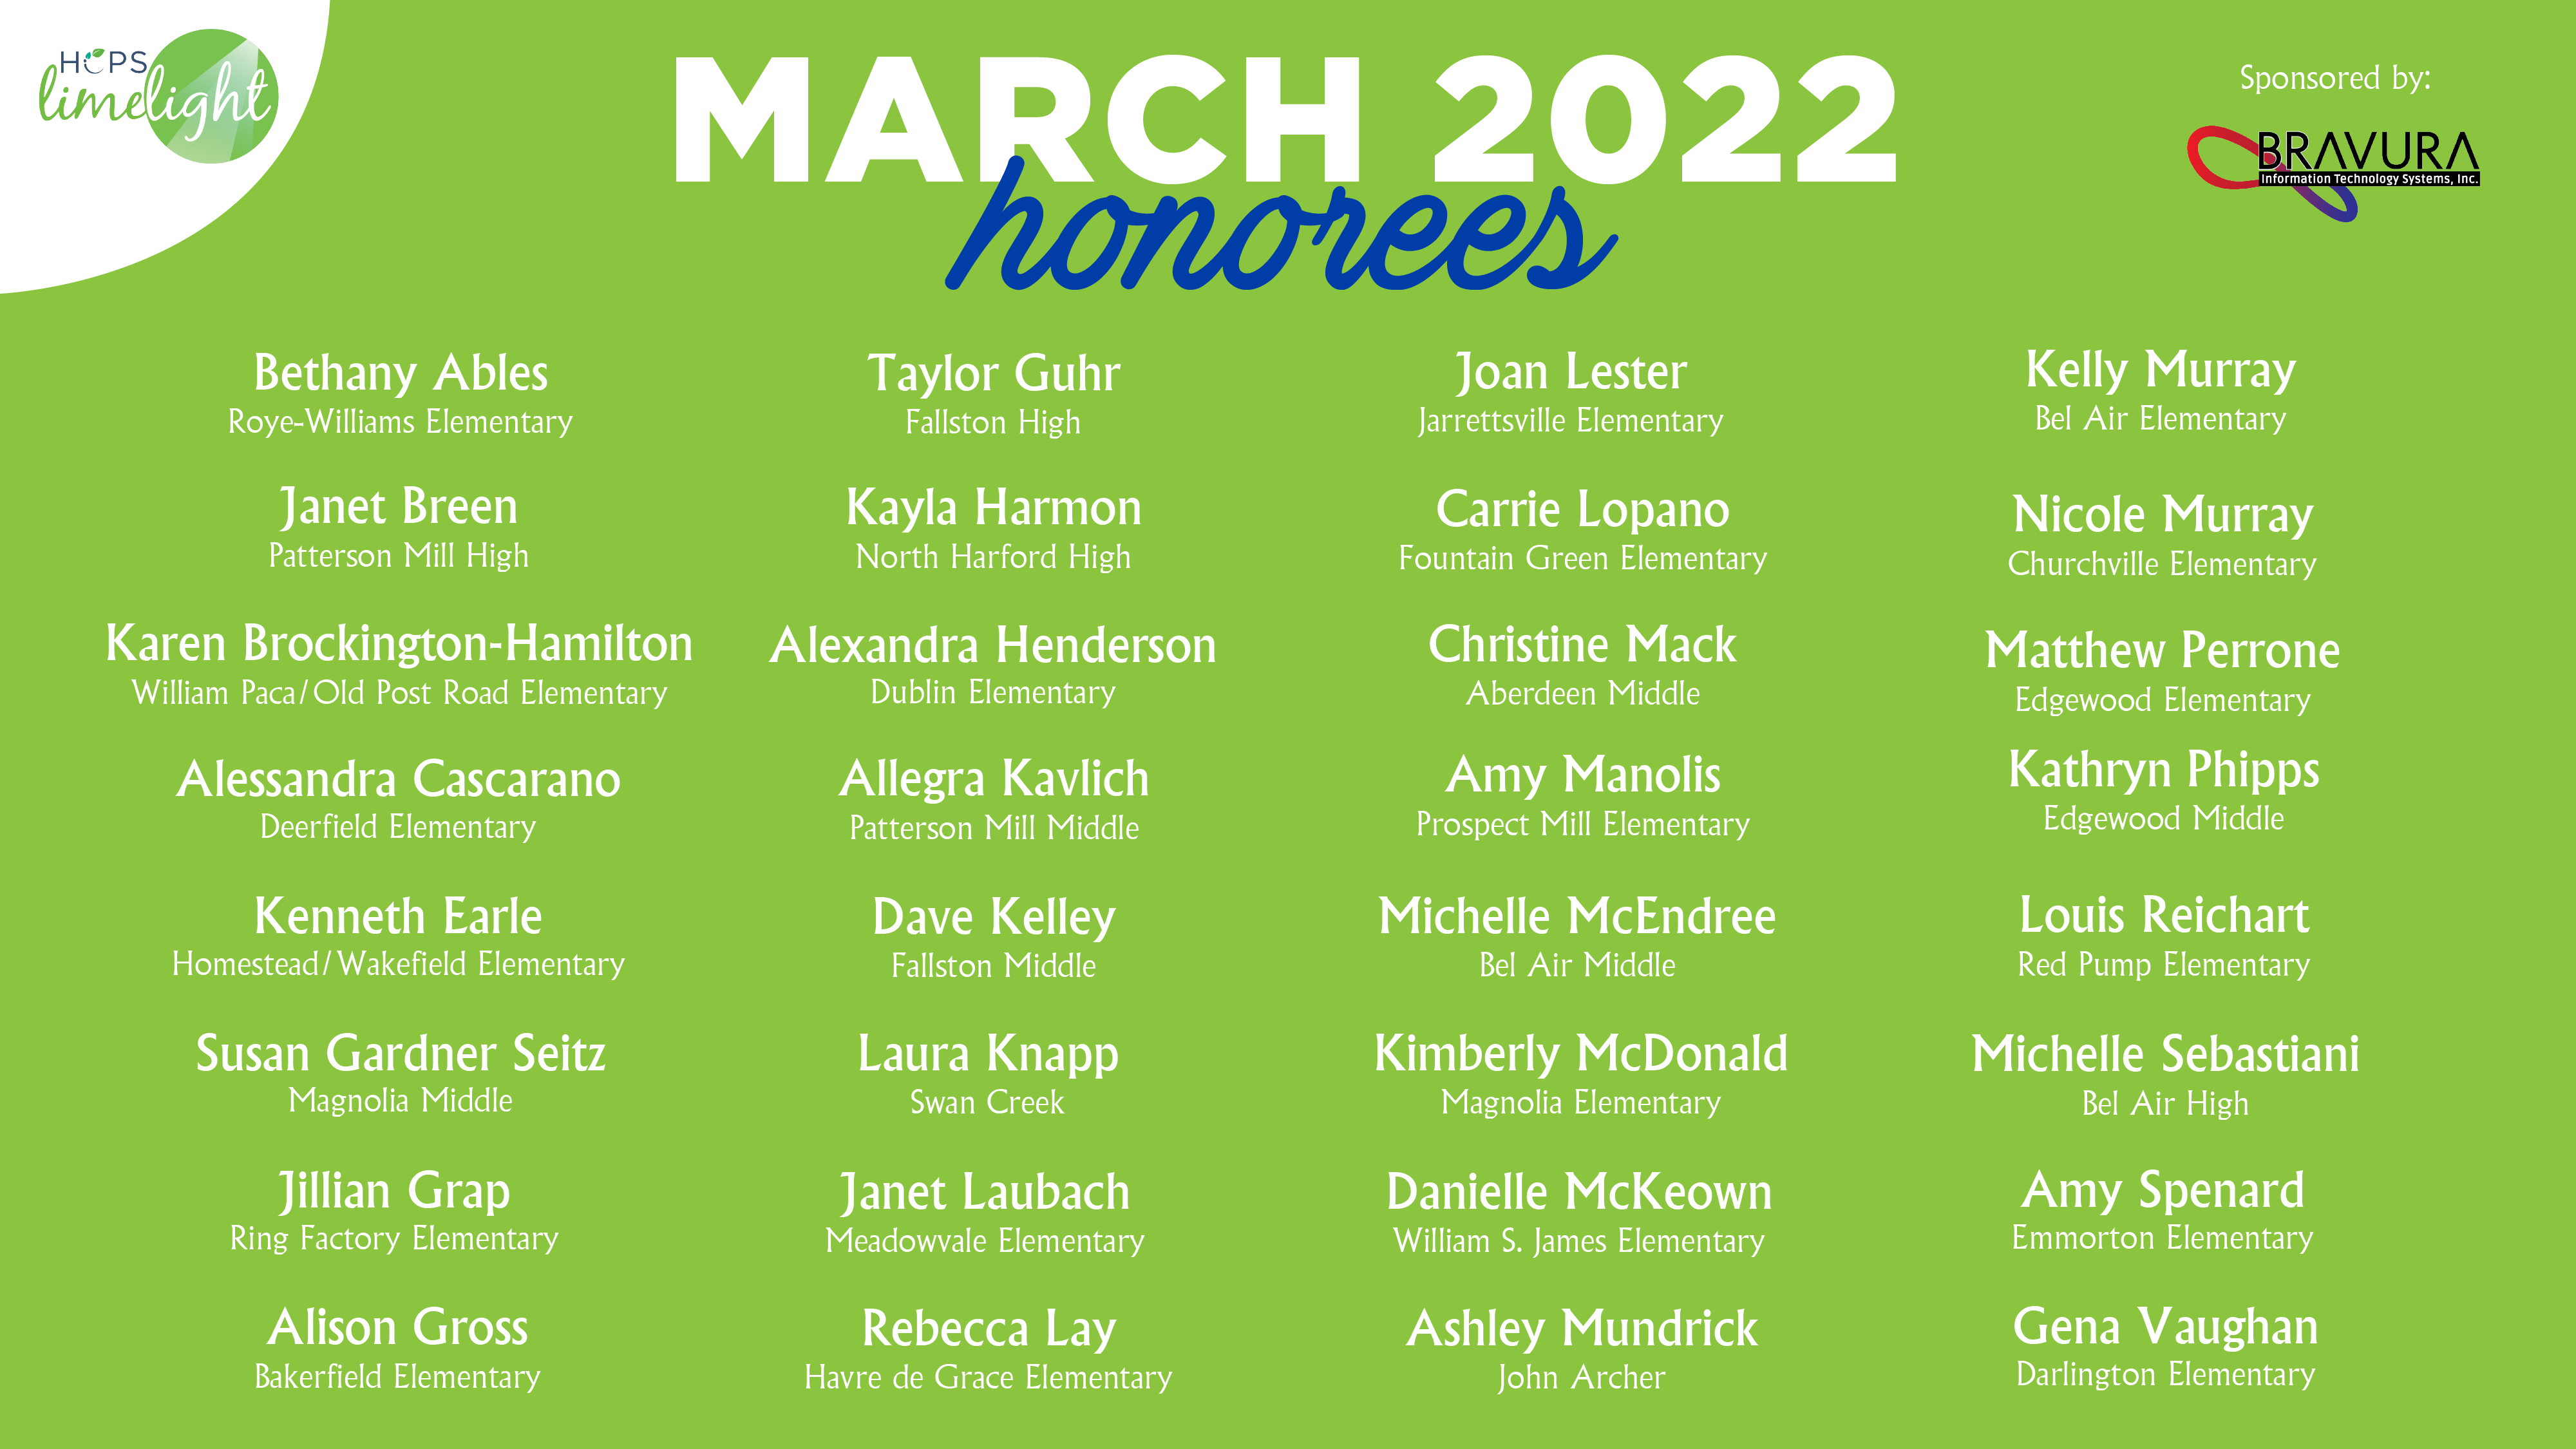 HCPS Limelight Honorees - Mar 2022